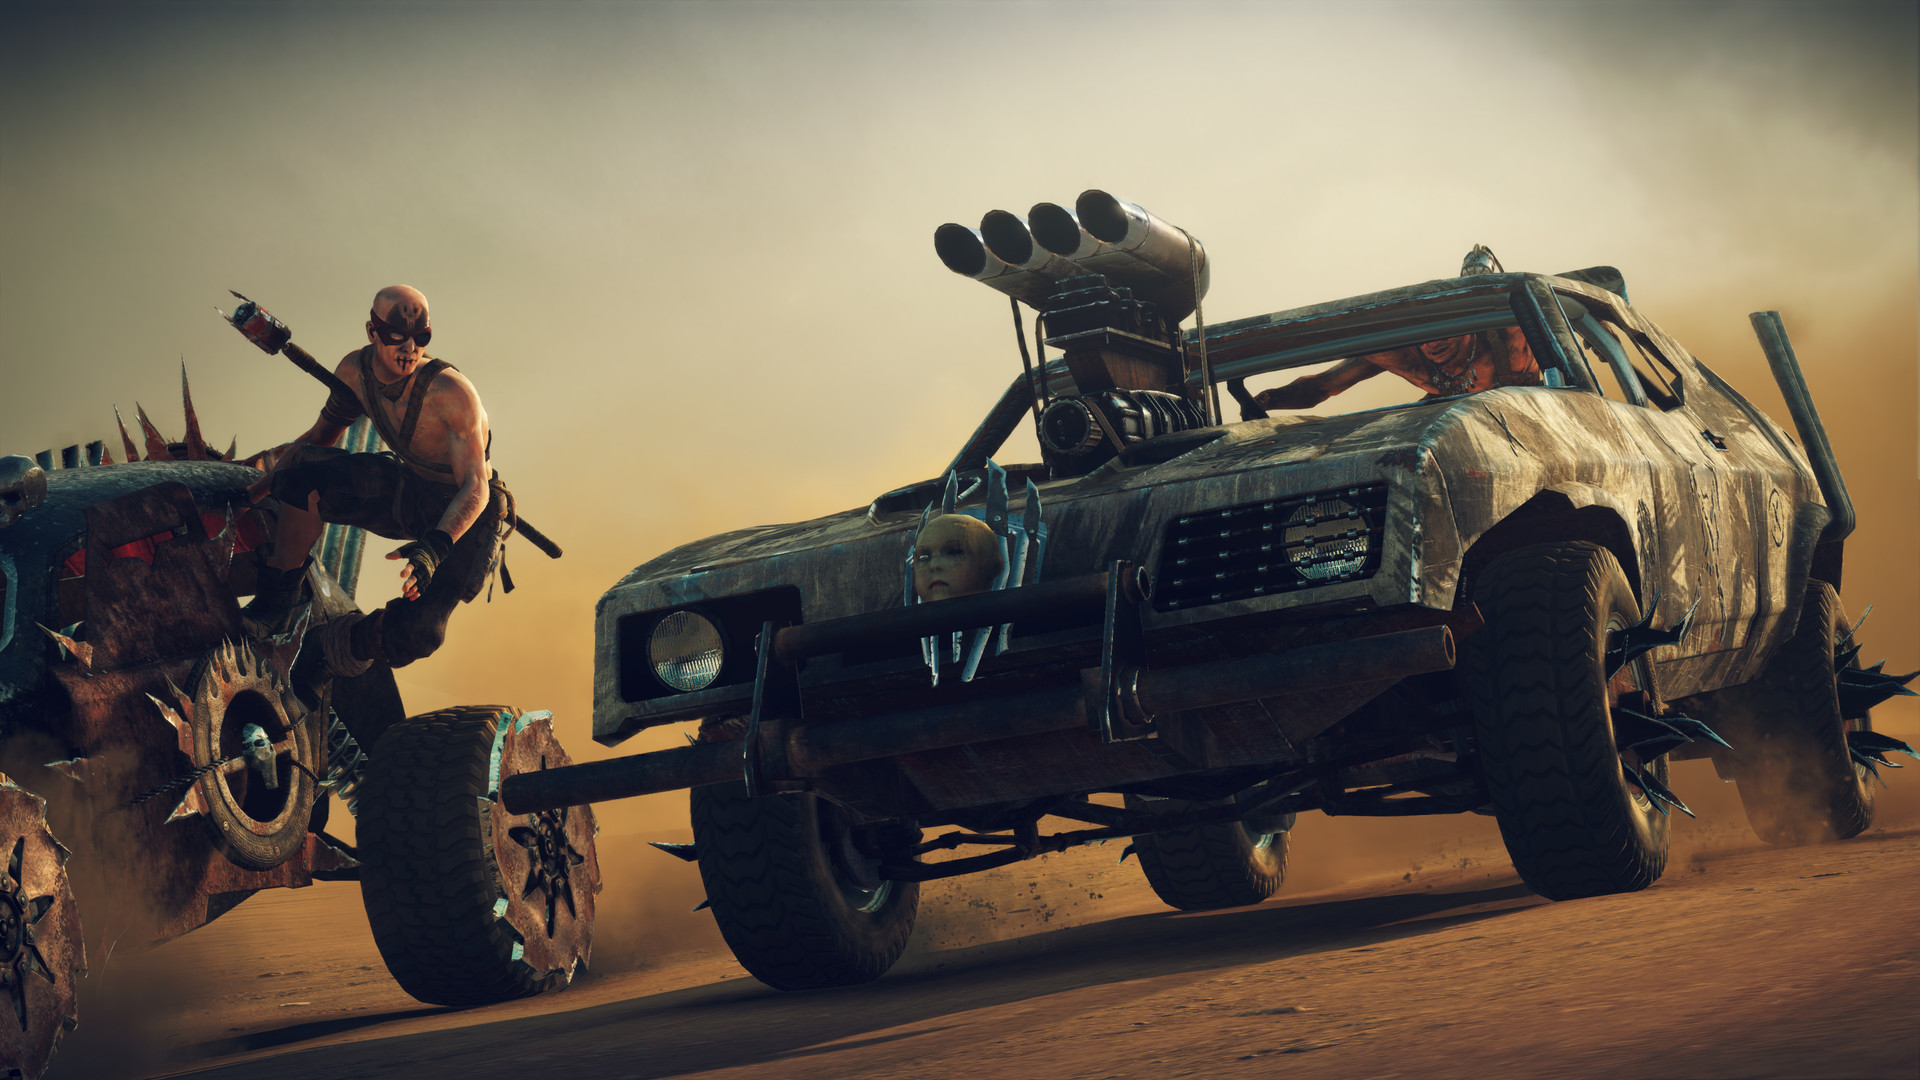 A screenshot from 2015's Mad Max video game.